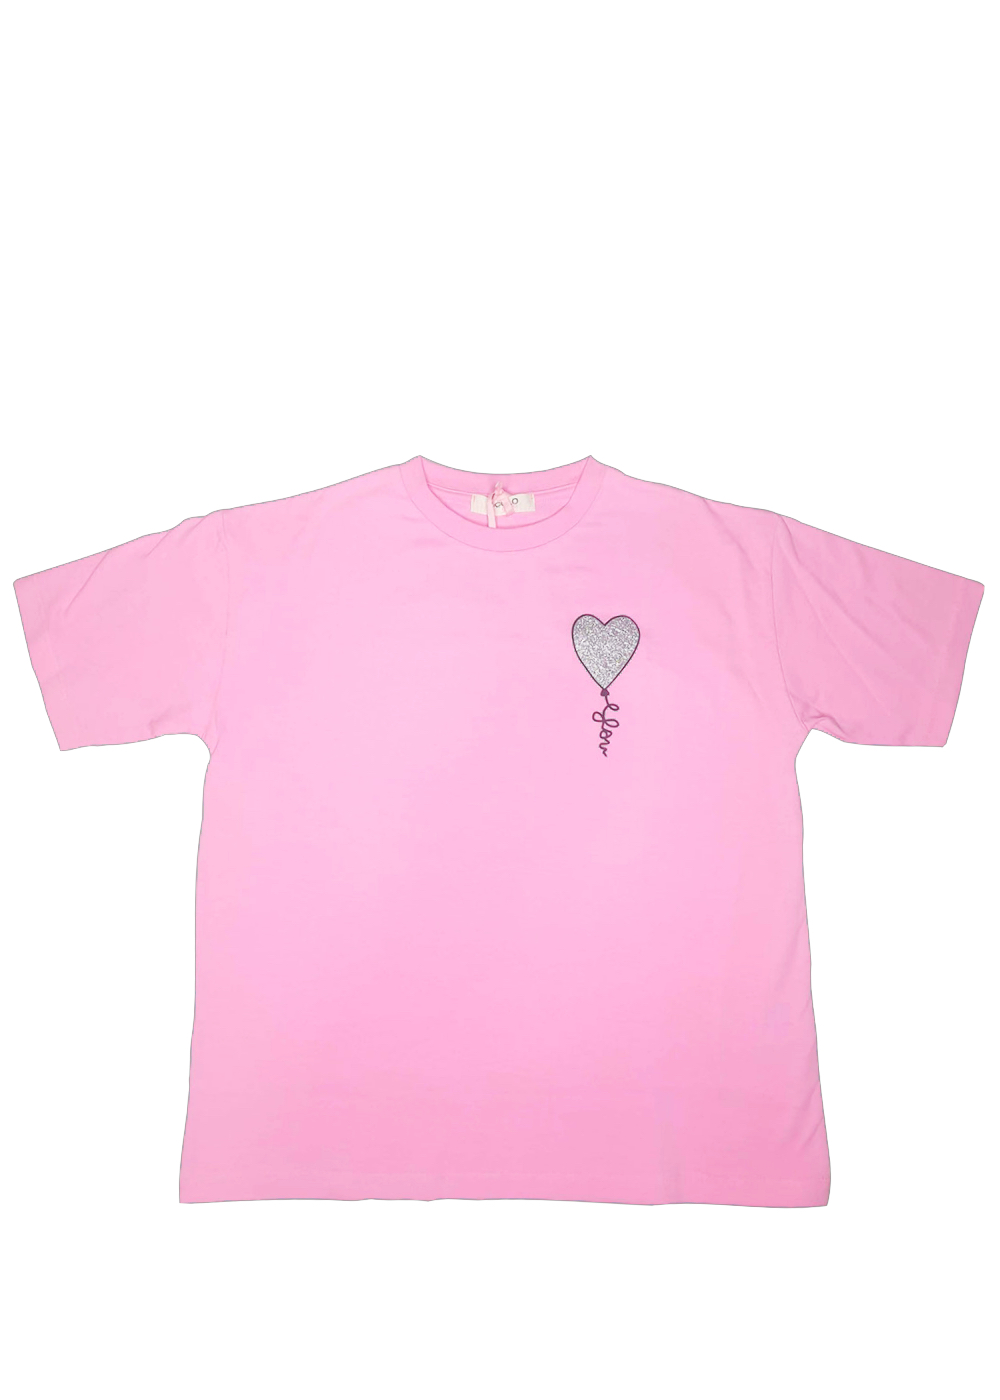 Featured image for “VICOLO T-SHIRT ROSA”